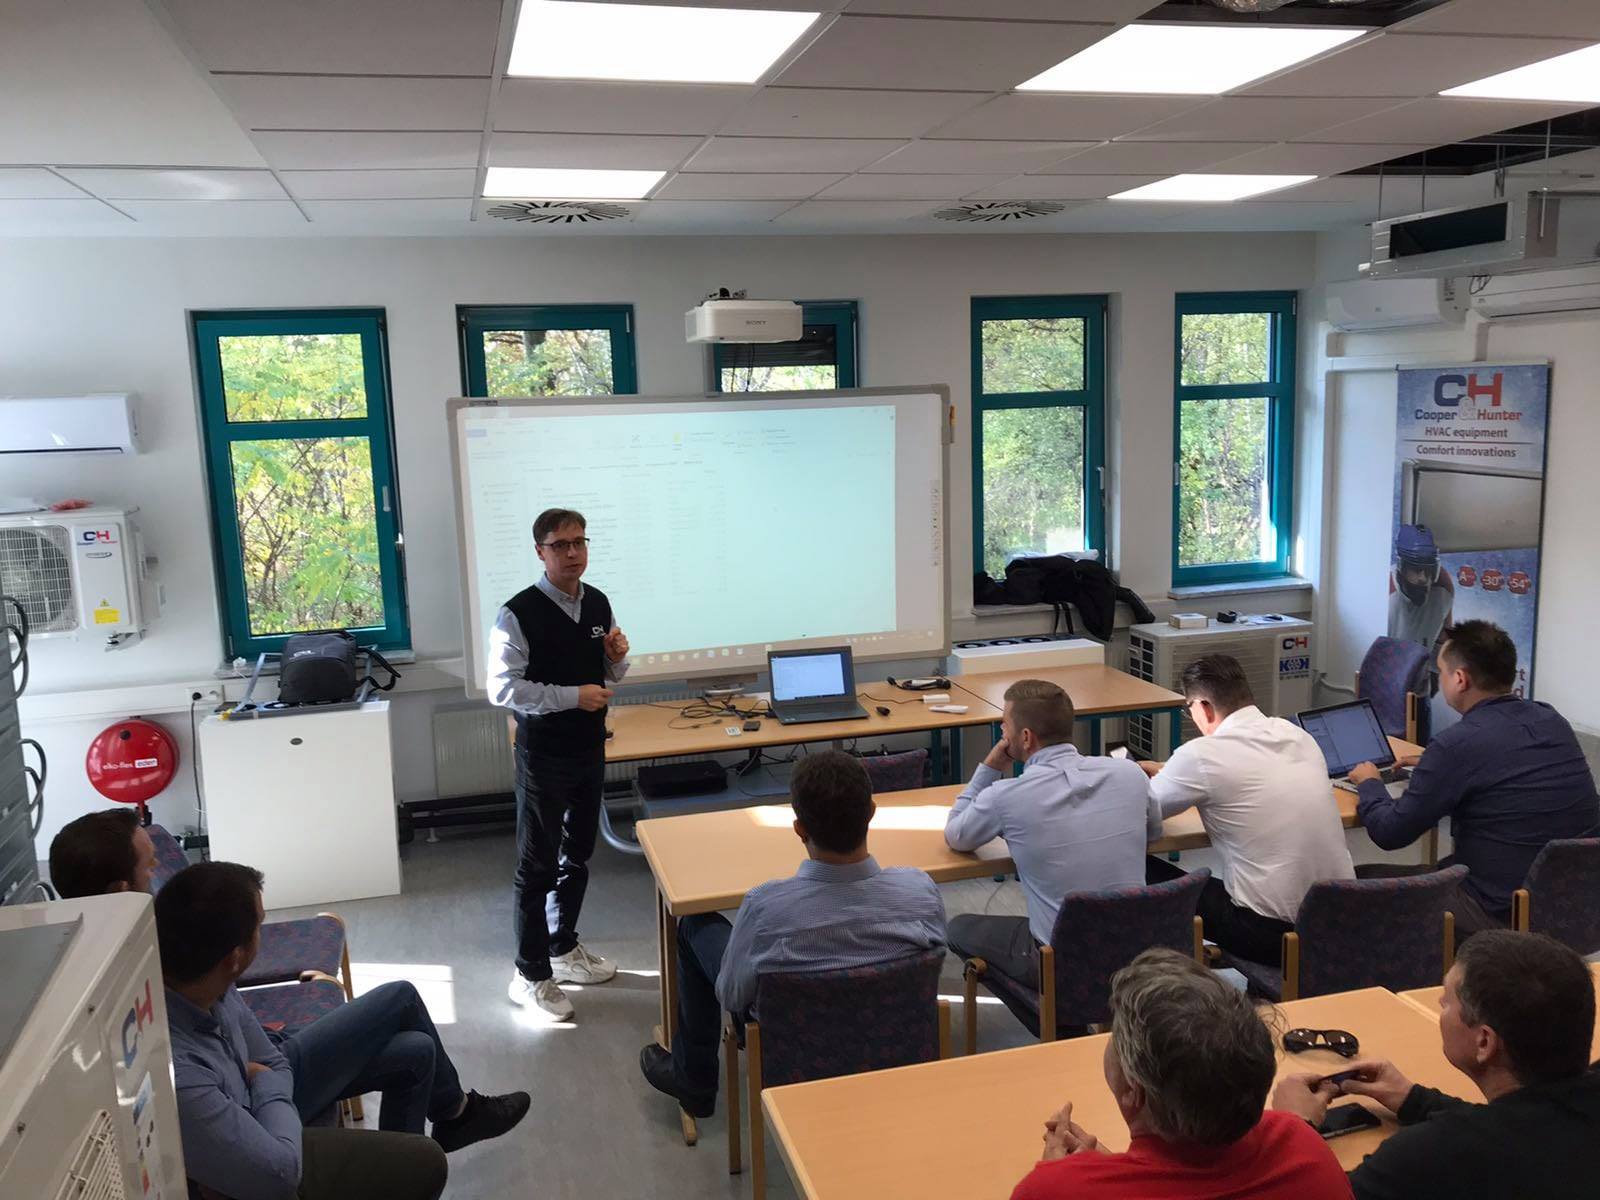 At the training center Cooper&Hunter in Vienna, another workshop was held for leading engineers of European dealers from several countries.